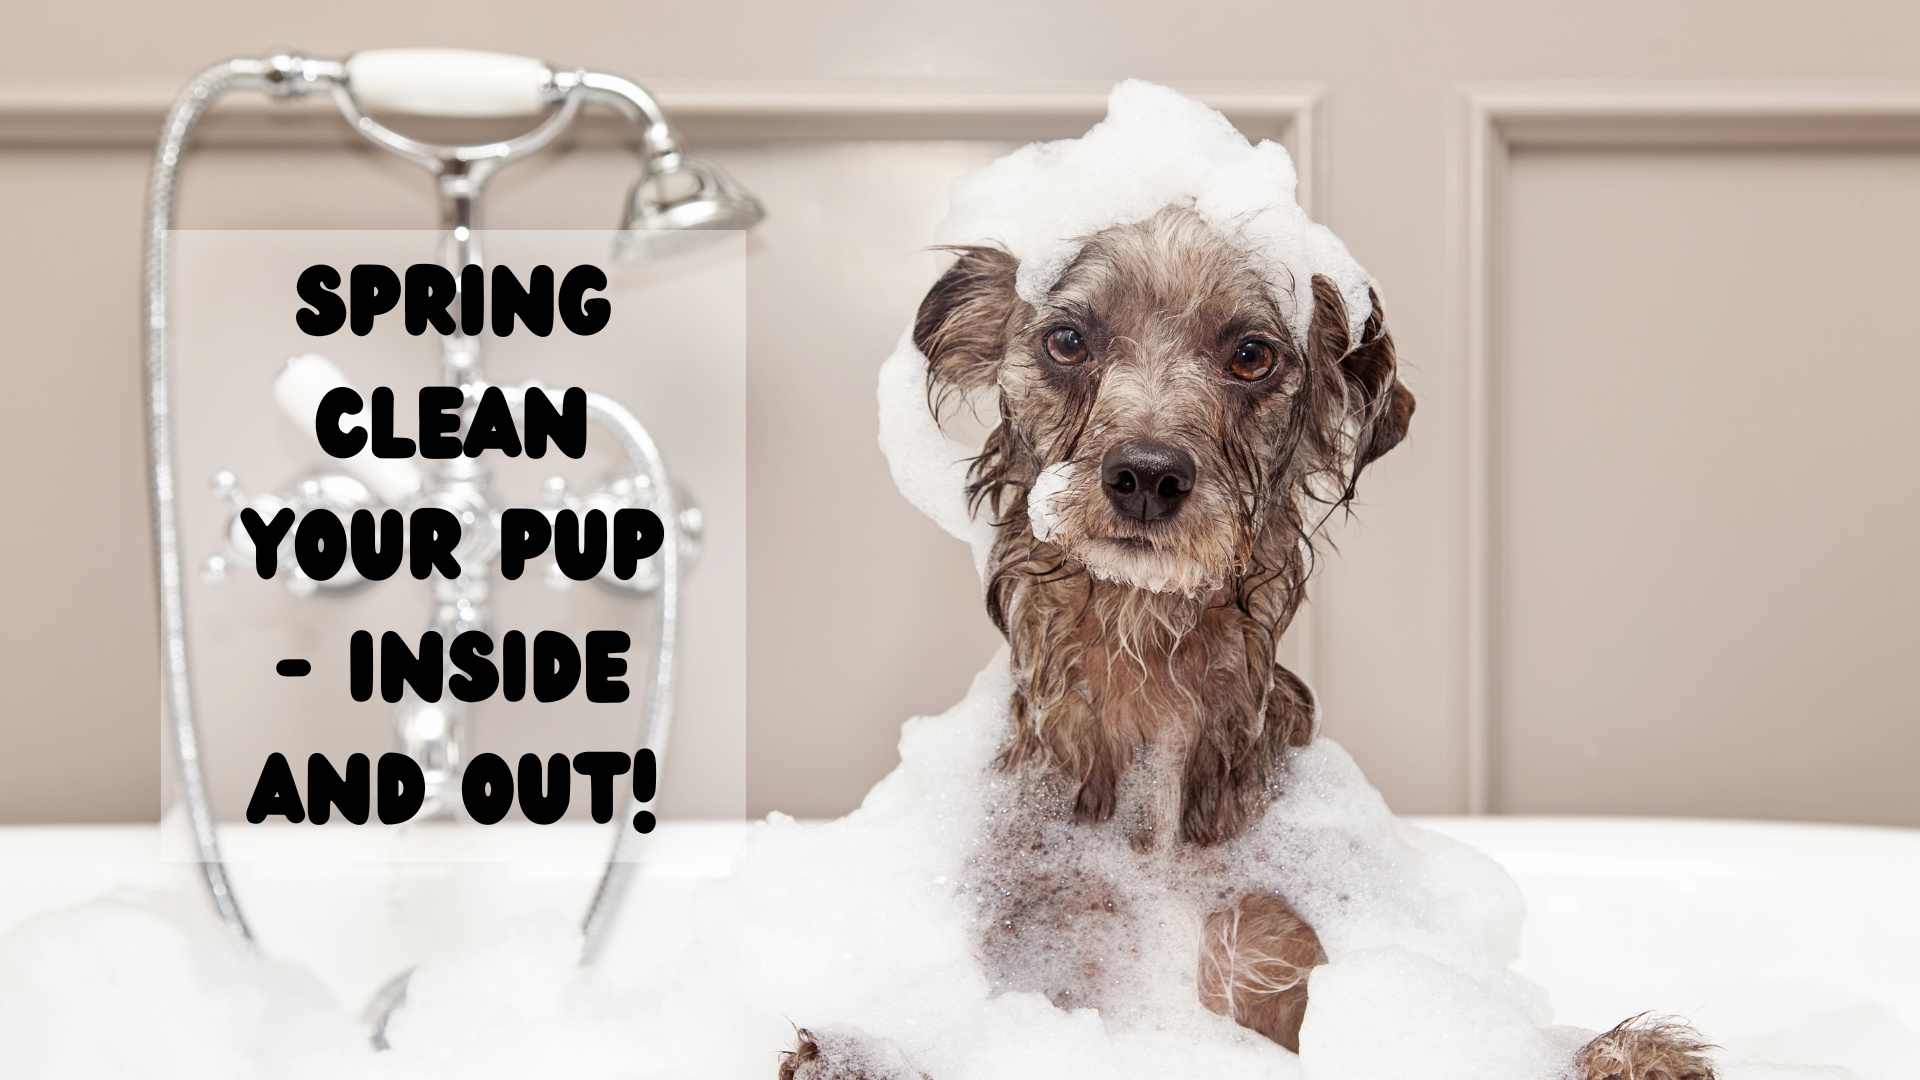 How to give your dog a ‘Spring Clean’ naturally – from the inside, out!